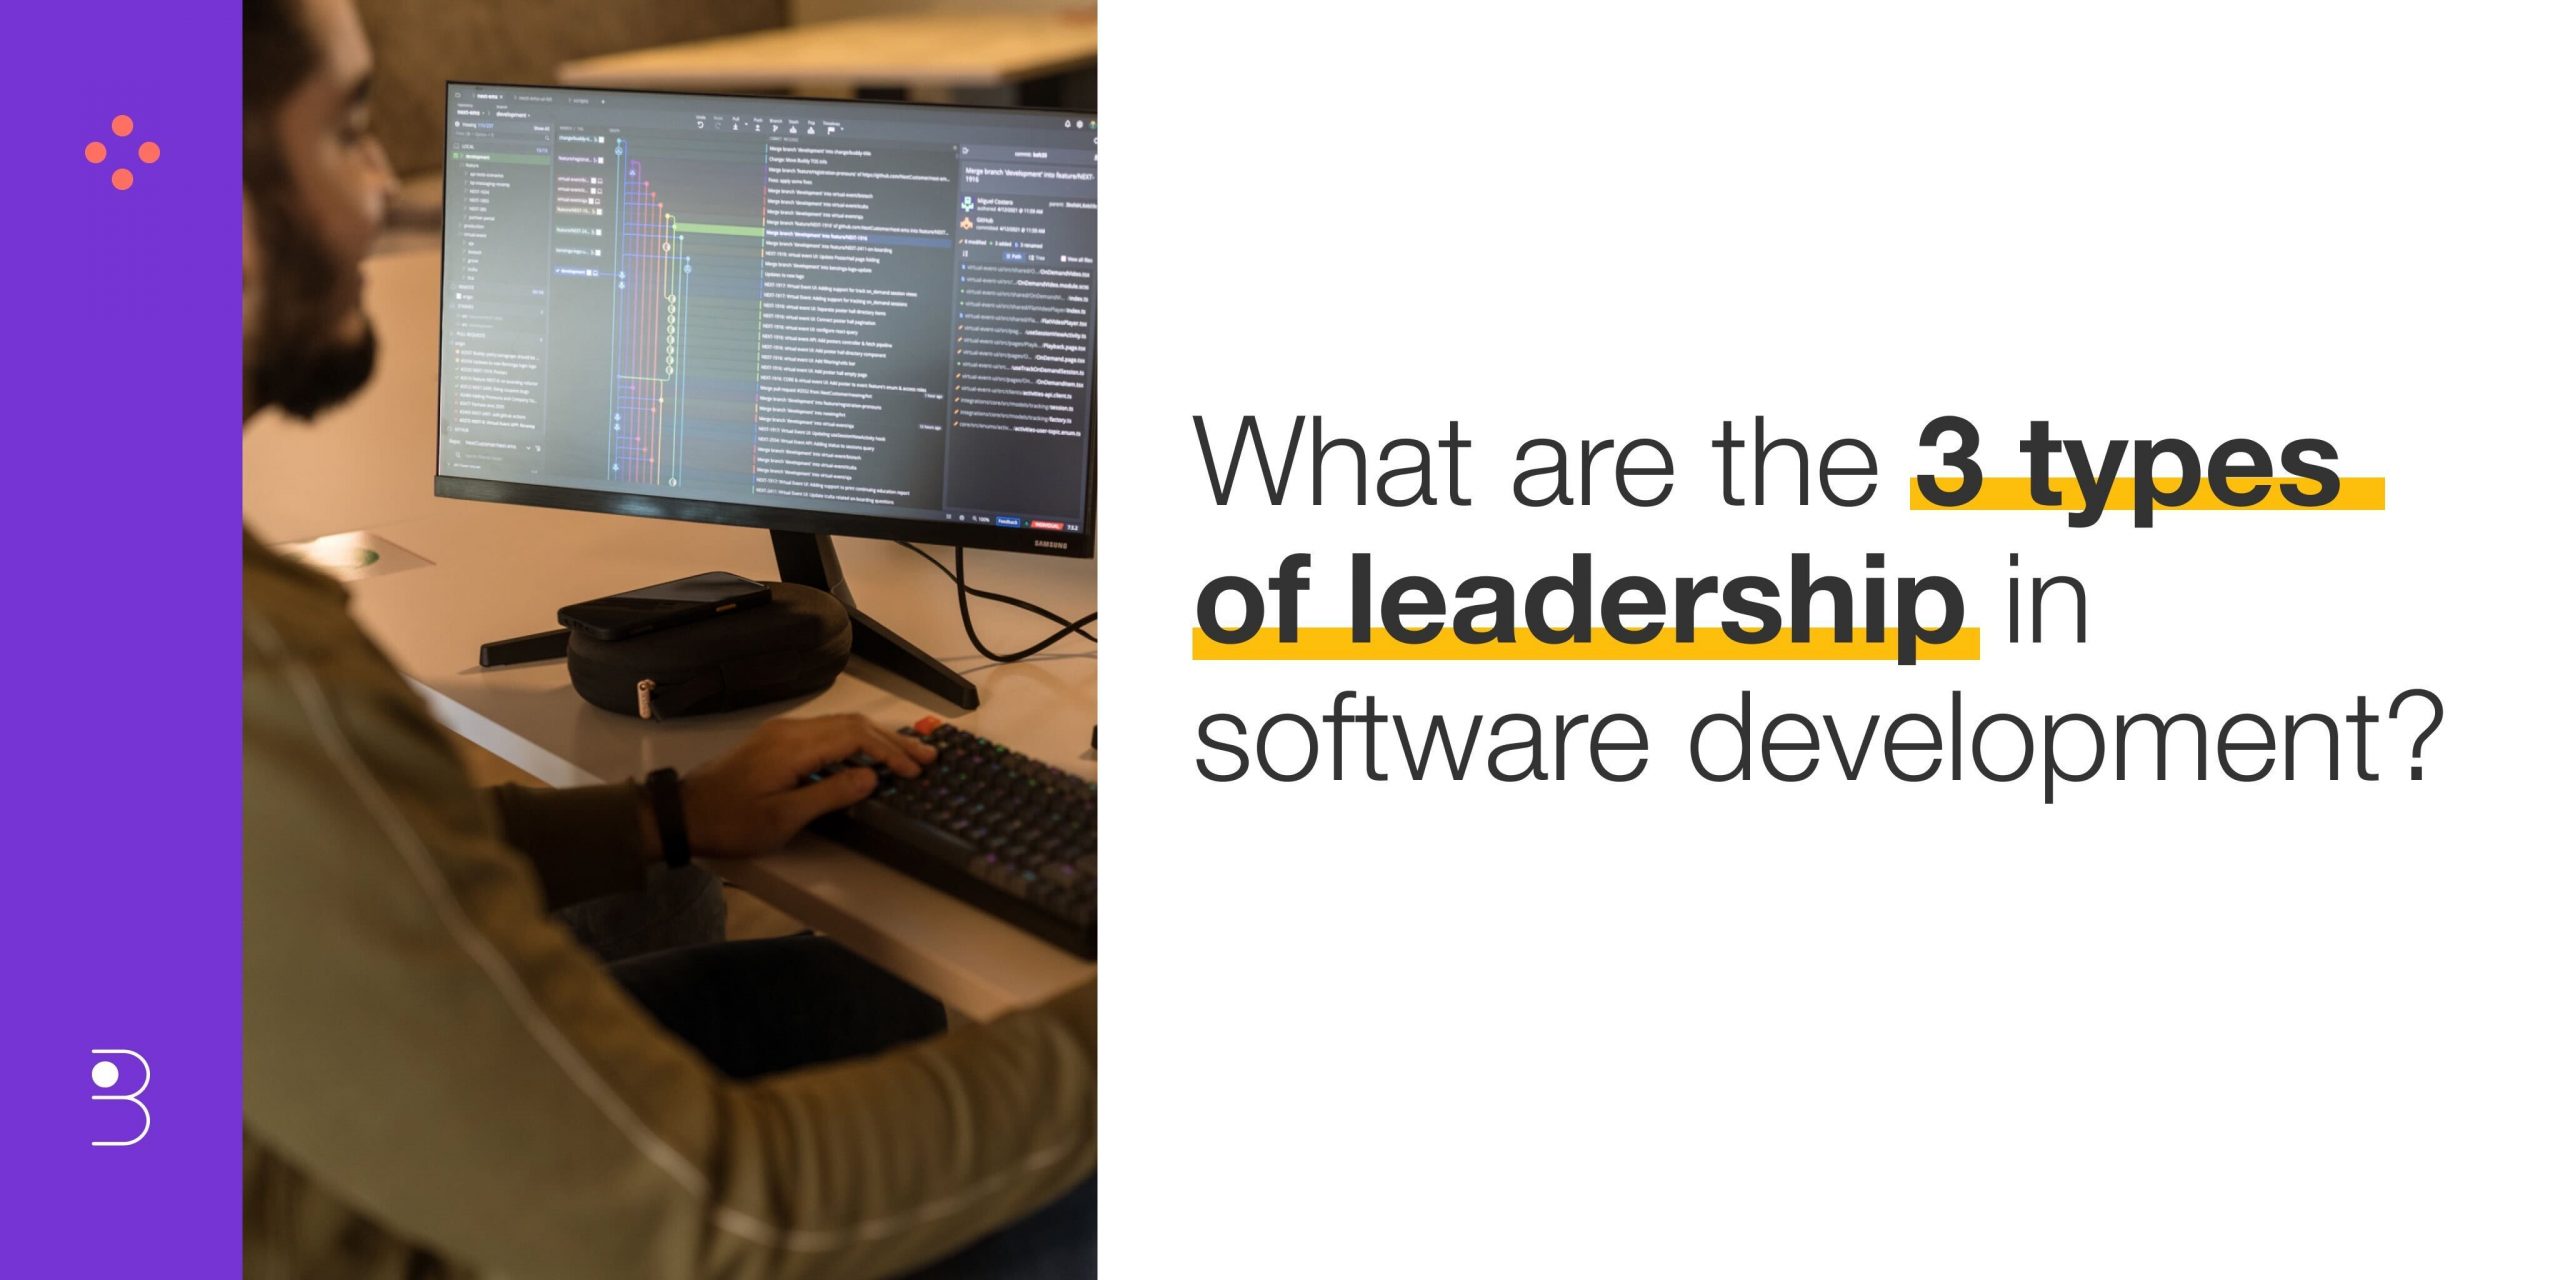 What are the 3 types of leadership in software development?